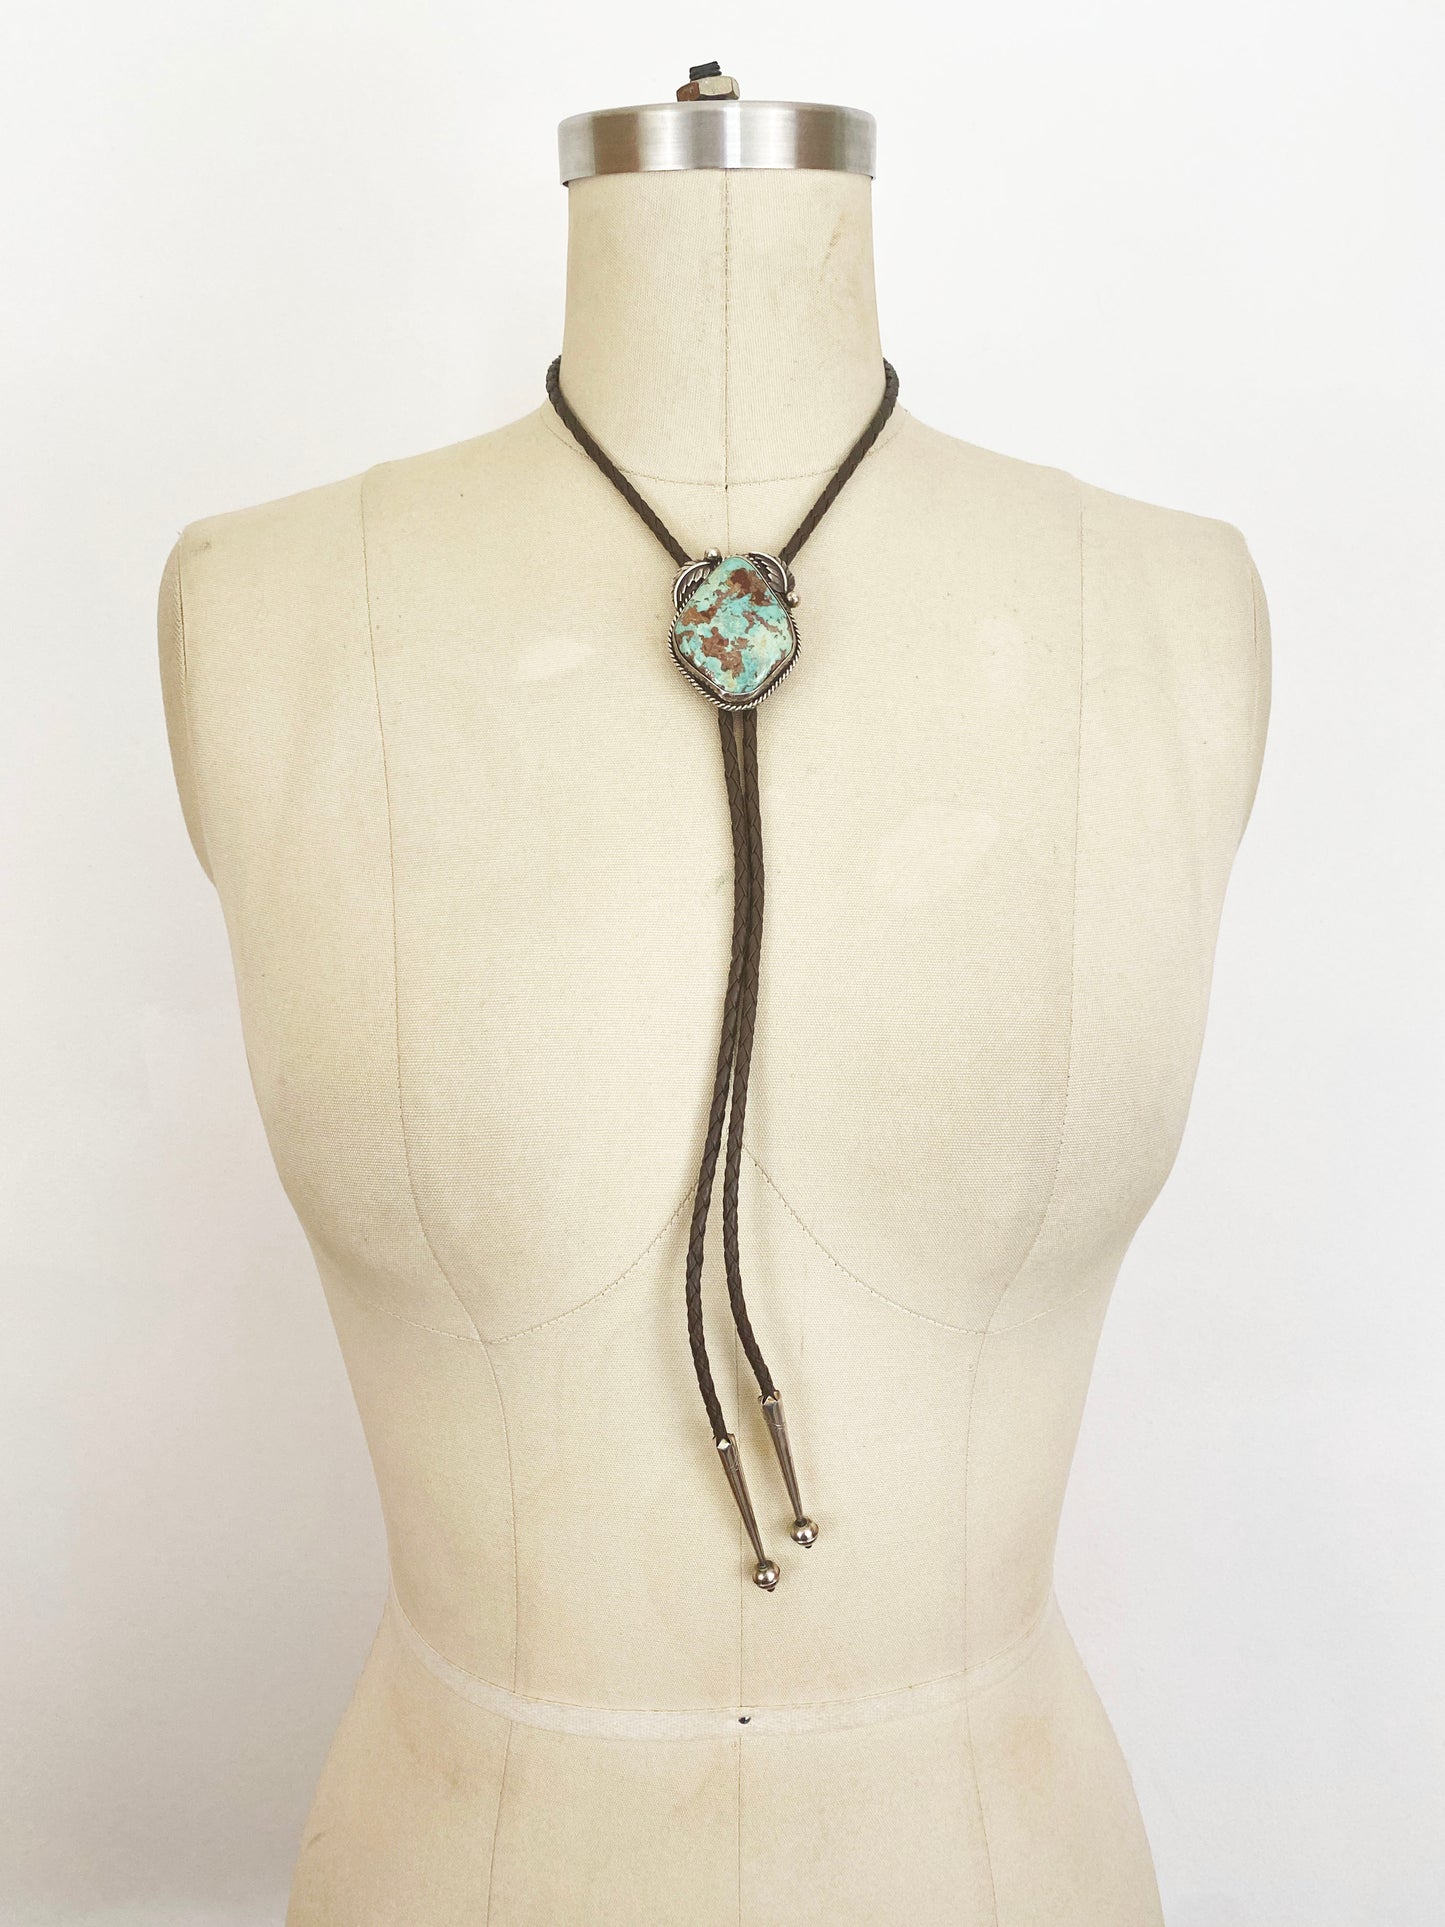 Vintage Native American Apache Jewelry Large Sterling Silver and Turquoise Bolo Tie Southwest Signed Artist Darrell Victor